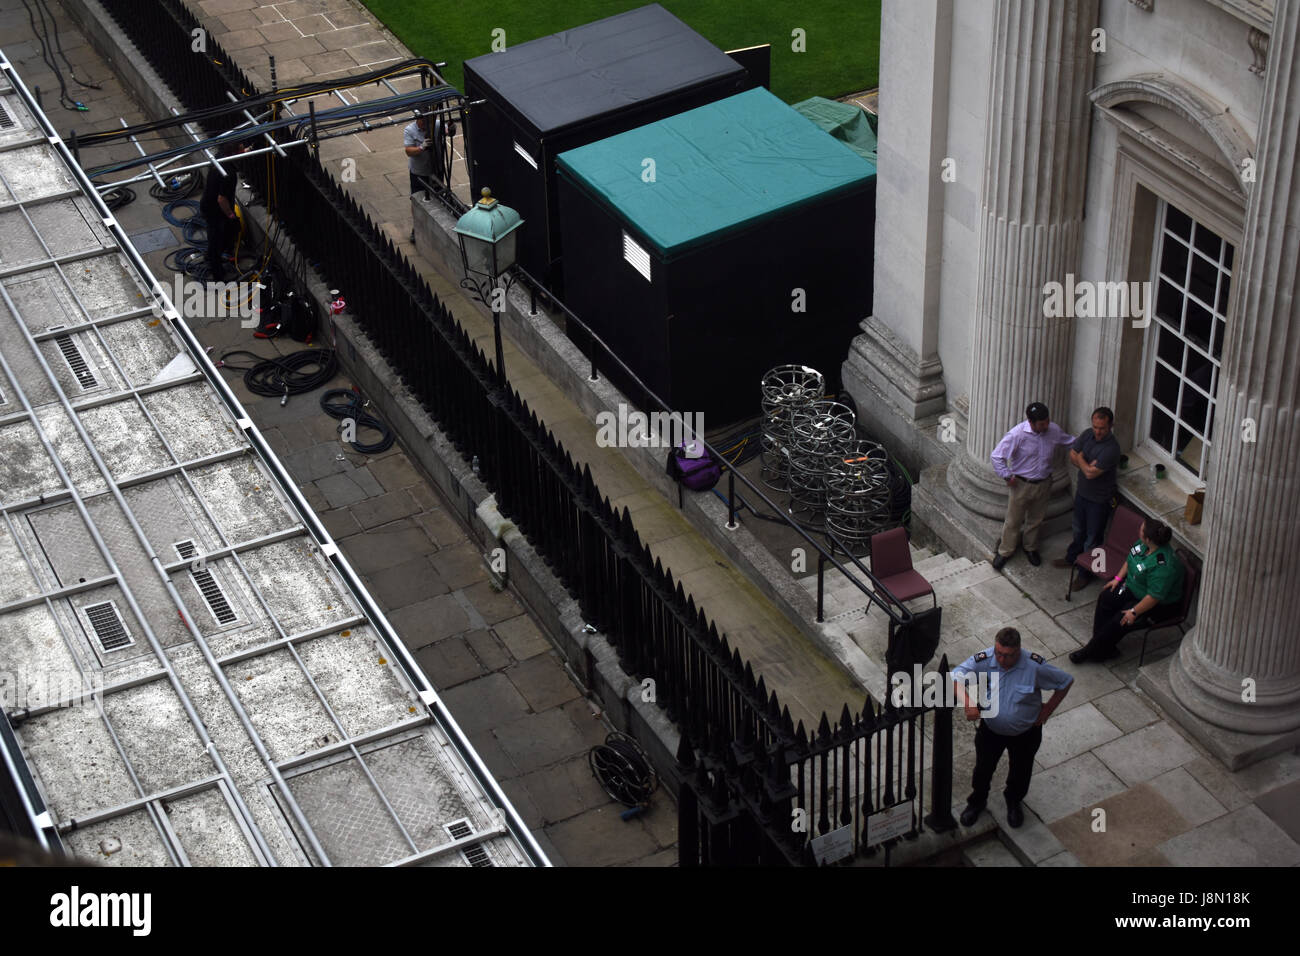 Cambridge, UK. 29th May 2017. Film crews set up for the BBC Election Debate at Senate House in Cambridge. Credit: Ben Grant/Alamy Live News Stock Photo